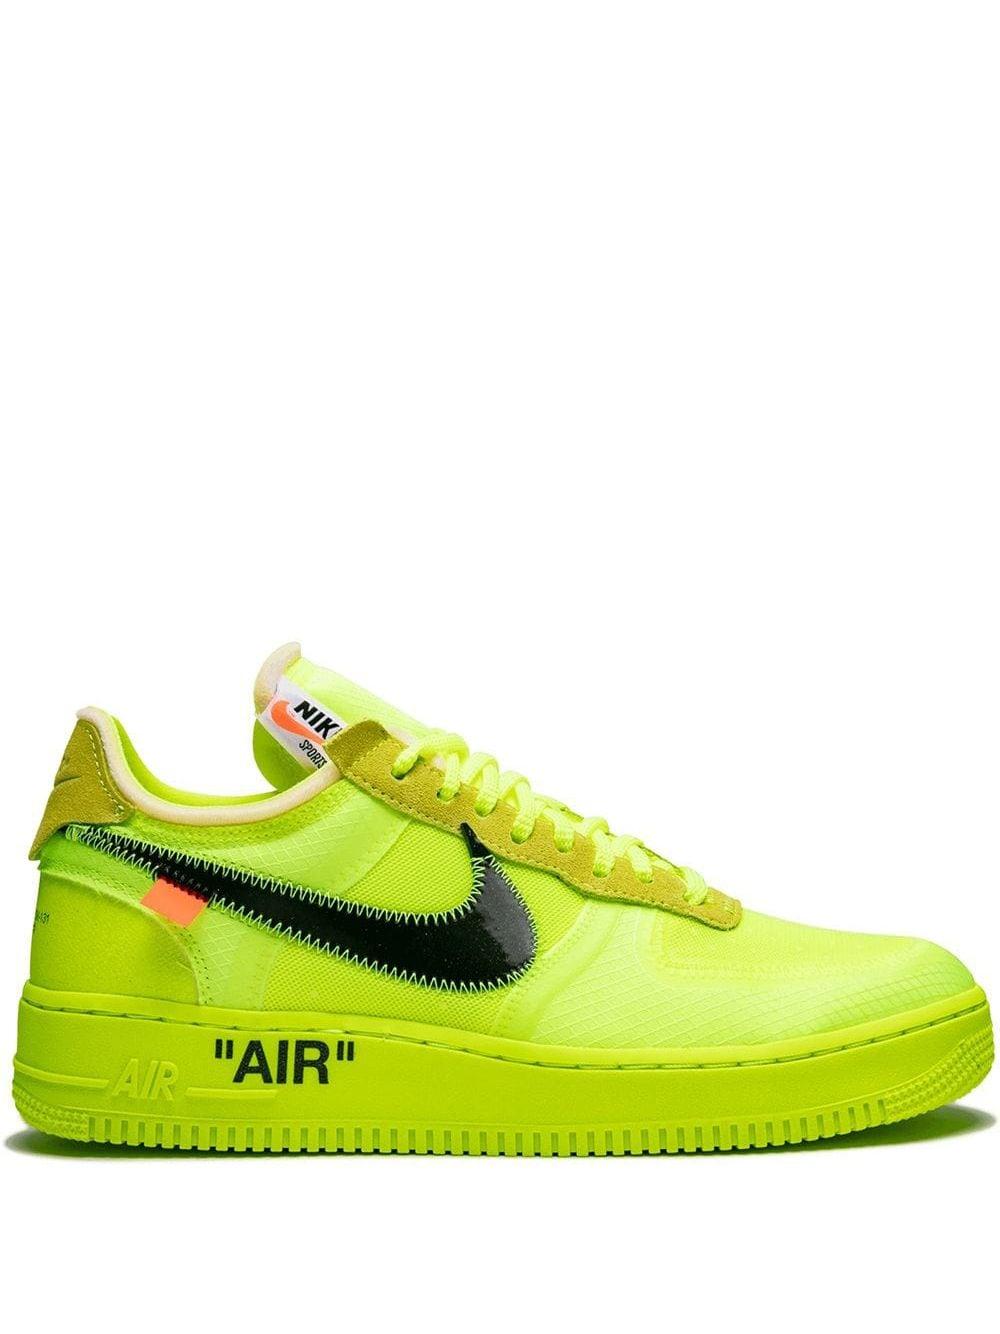 NIKE X OFF-WHITE The 10: Air Force 1 Low 'off-white Volt' Shoes in Green ( Yellow) for Men - Save 72% | Lyst